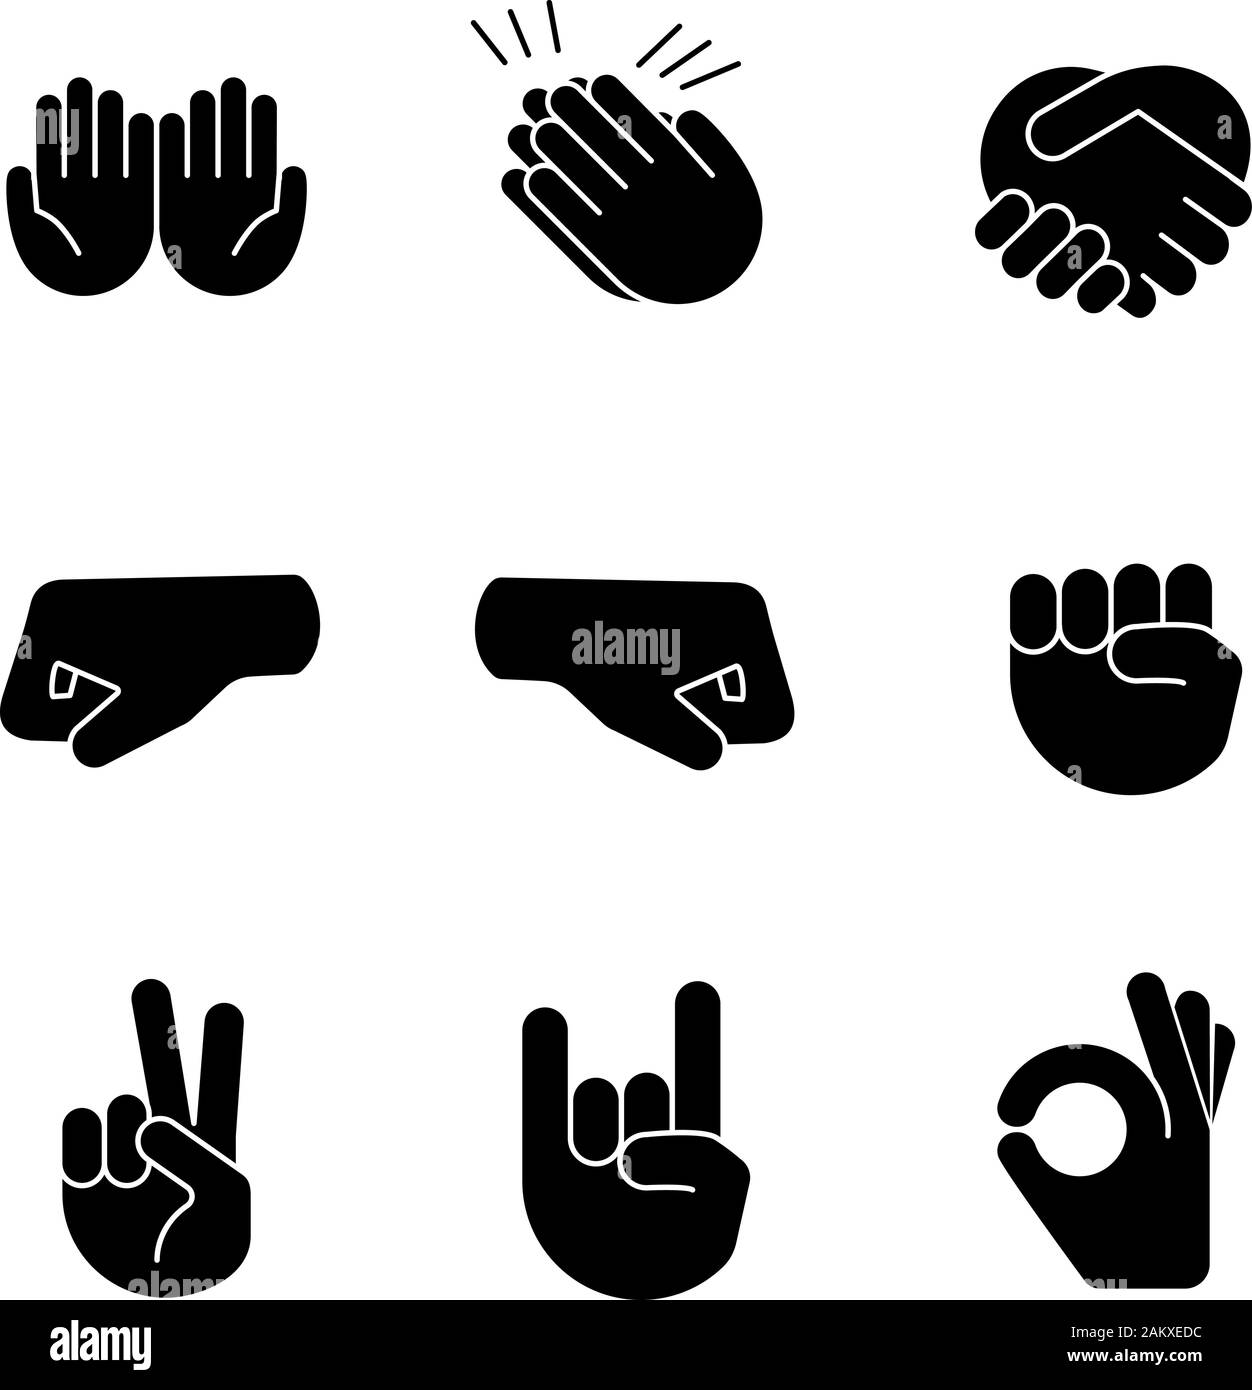 Hand gesture emojis glyph icons set. Begging, applause, handshake, left and right fists, peace, rock on, OK gesturing. Shaking, cupped, clapping hands Stock Vector